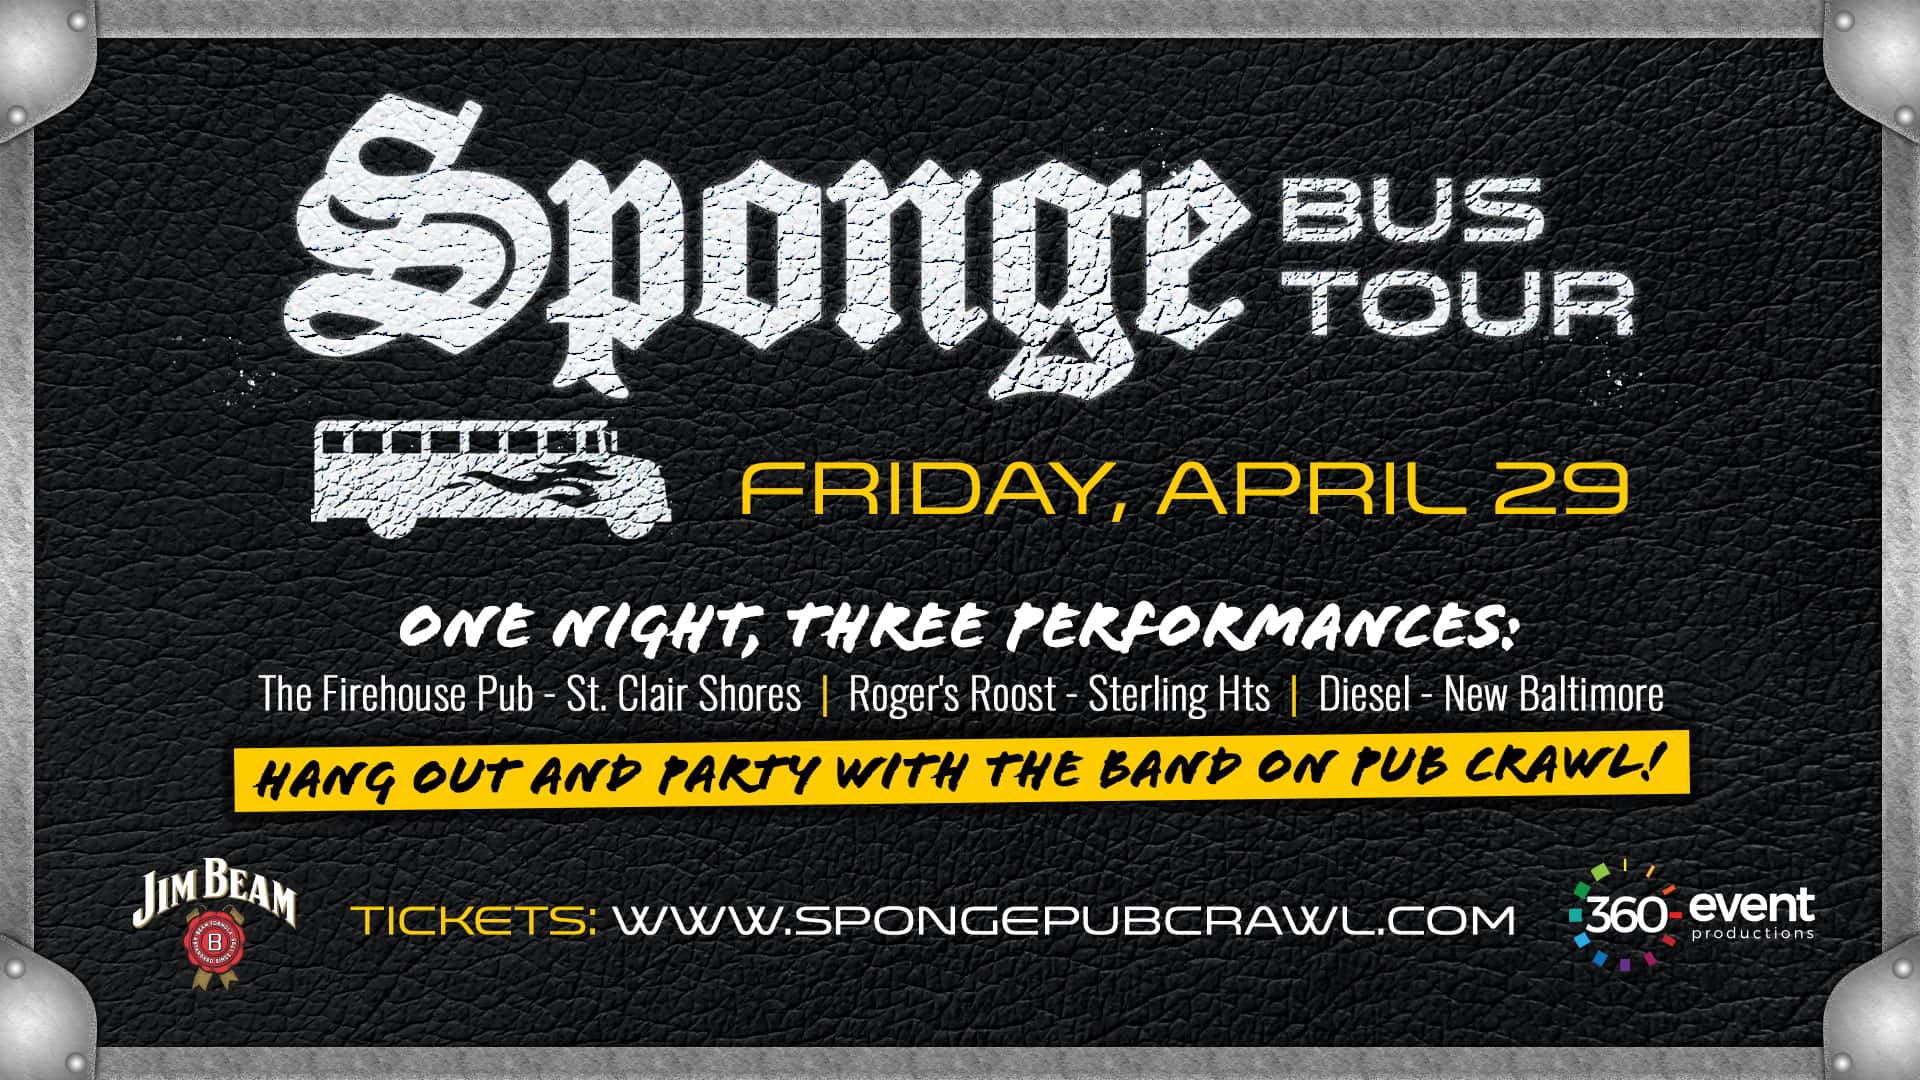 Sponge Bus Tour; Friday, April 29. One night, three performances at The Firehouse Pub in St. Clair Shores, Roger's Roost in Sterling Heights, and Diesel in New Baltimore. Hang out and party with the band on pub crawl! Tickets: www.spongepubcrawl.com